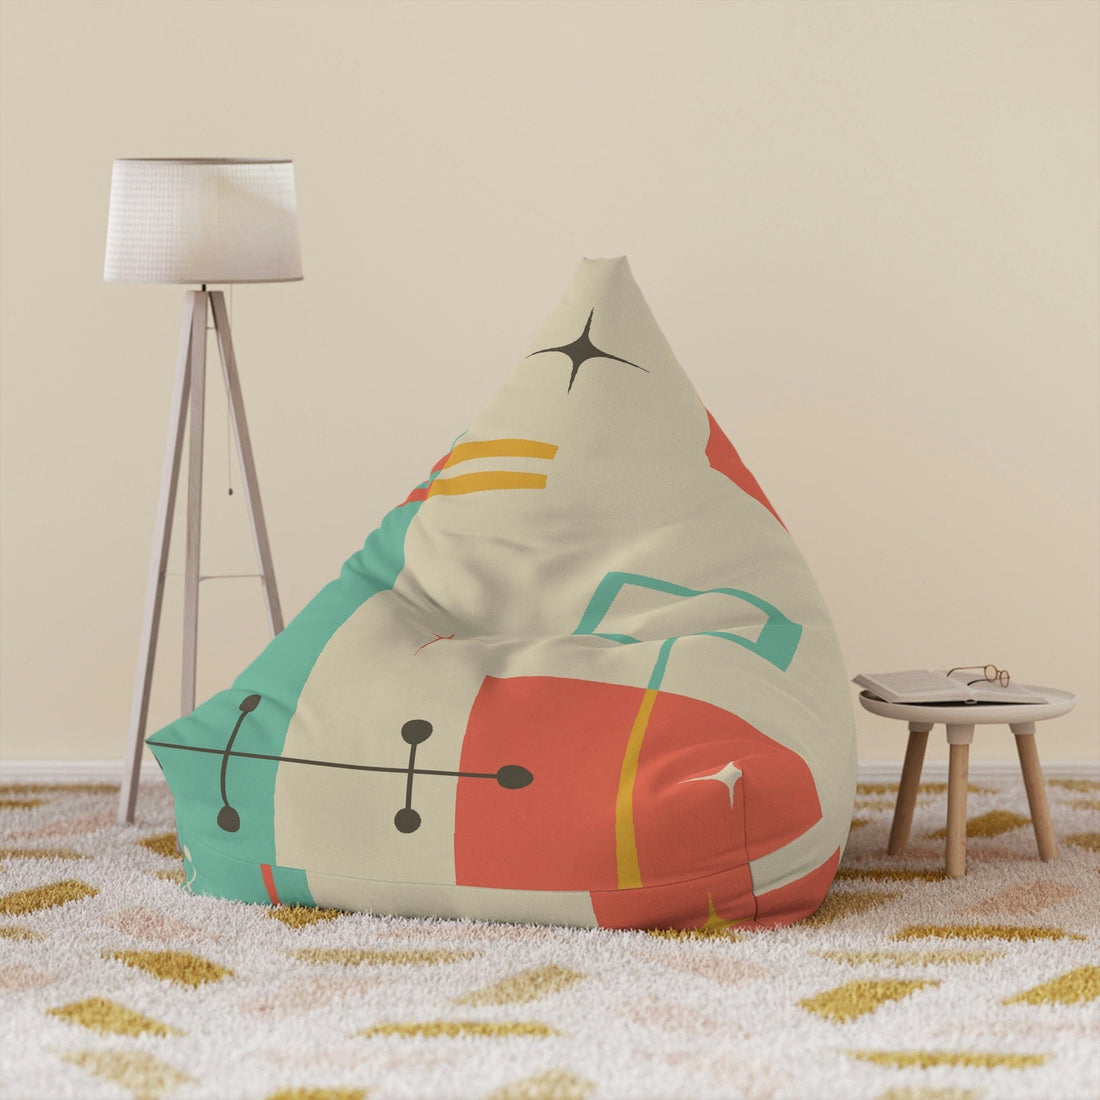 Kate McEnroe New York Mid Century Modern Atomic Starburst Bean Bag Chair Cover, Retro Geometric Abstract Bean bag Cover for Teens and Adults, MCM Dorm Room DecorBean Bag Chair Covers14313273841385313319